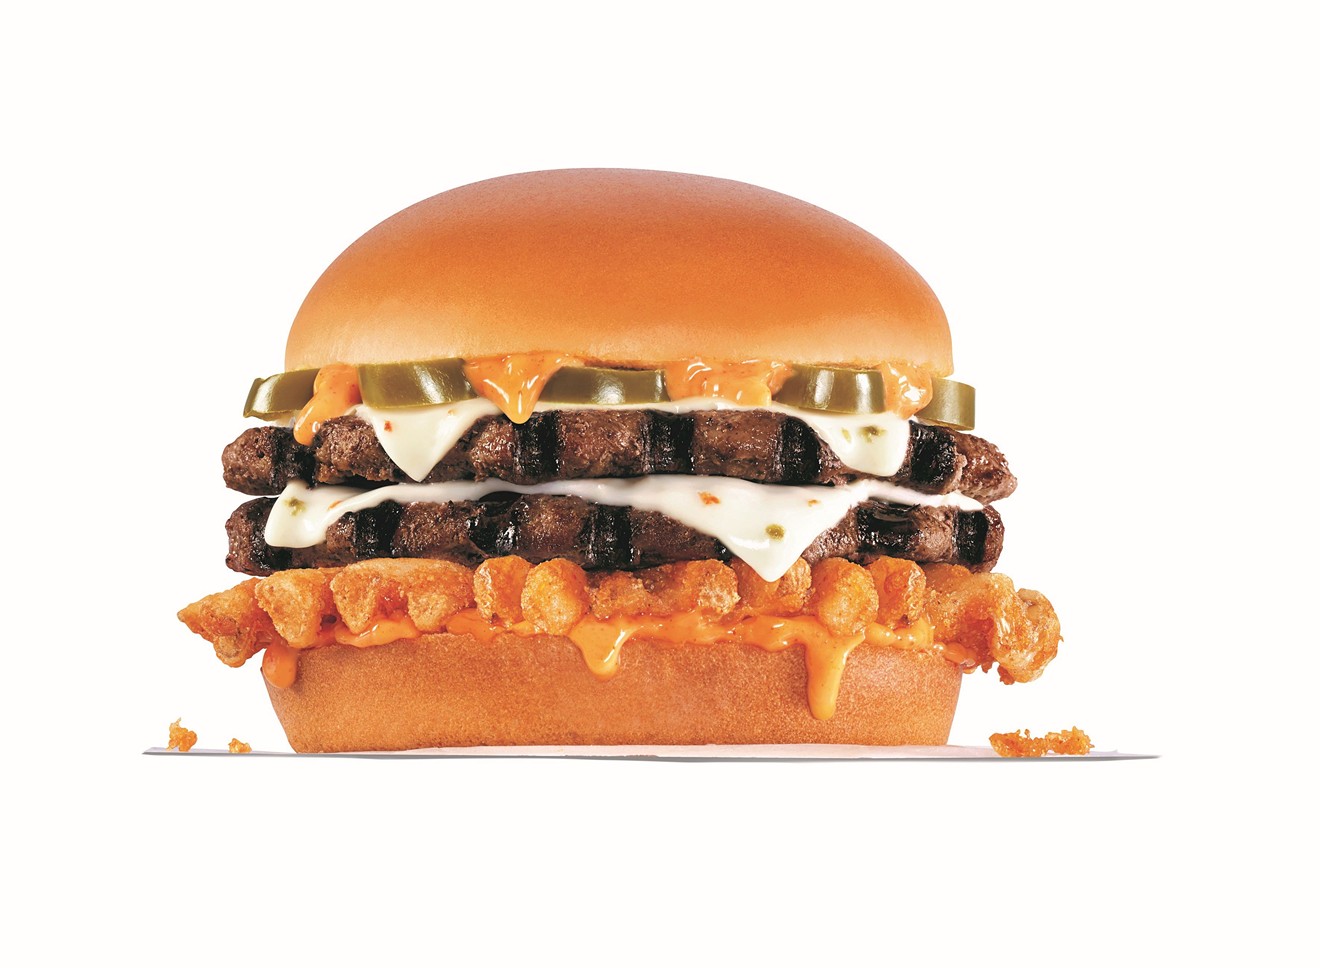 The Rocky Mountain High CheeseBurger Delight will come topped with Santa Fe Sauce infused with 5 milligrams of CBD.